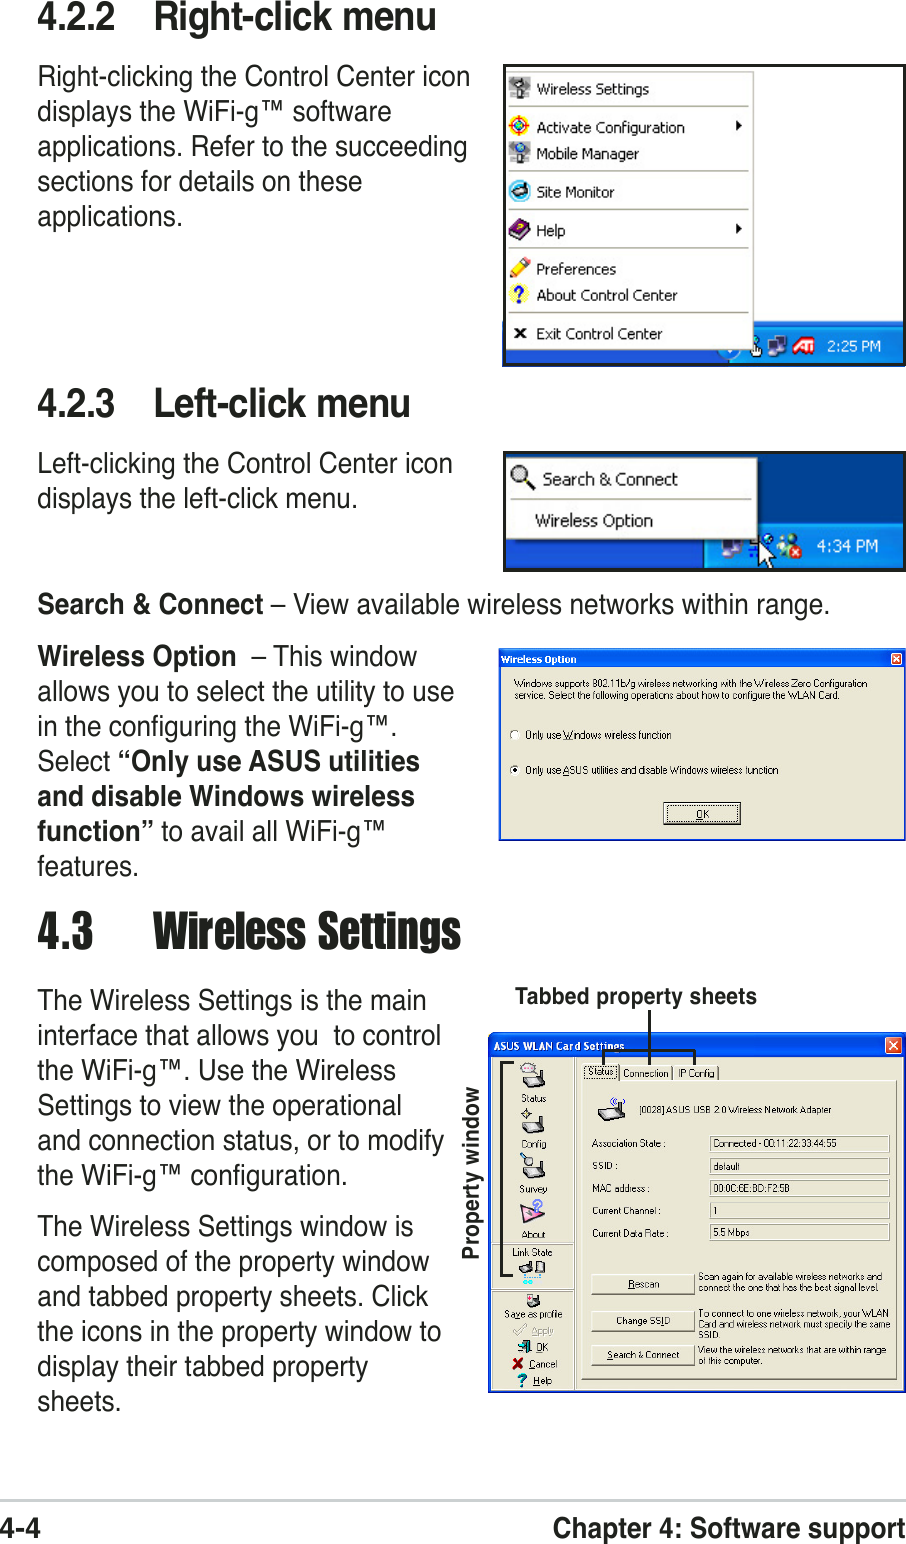 4-4Chapter 4: Software support4.3 Wireless SettingsThe Wireless Settings is the maininterface that allows you  to controlthe WiFi-g™. Use the WirelessSettings to view the operationaland connection status, or to modifythe WiFi-g™ configuration.The Wireless Settings window iscomposed of the property windowand tabbed property sheets. Clickthe icons in the property window todisplay their tabbed propertysheets.Property windowTabbed property sheets4.2.2 Right-click menuRight-clicking the Control Center icondisplays the WiFi-g™ softwareapplications. Refer to the succeedingsections for details on theseapplications.4.2.3 Left-click menuLeft-clicking the Control Center icondisplays the left-click menu.Search &amp; Connect – View available wireless networks within range.Wireless Option  – This windowallows you to select the utility to usein the configuring the WiFi-g™.Select “Only use ASUS utilitiesand disable Windows wirelessfunction” to avail all WiFi-g™features.